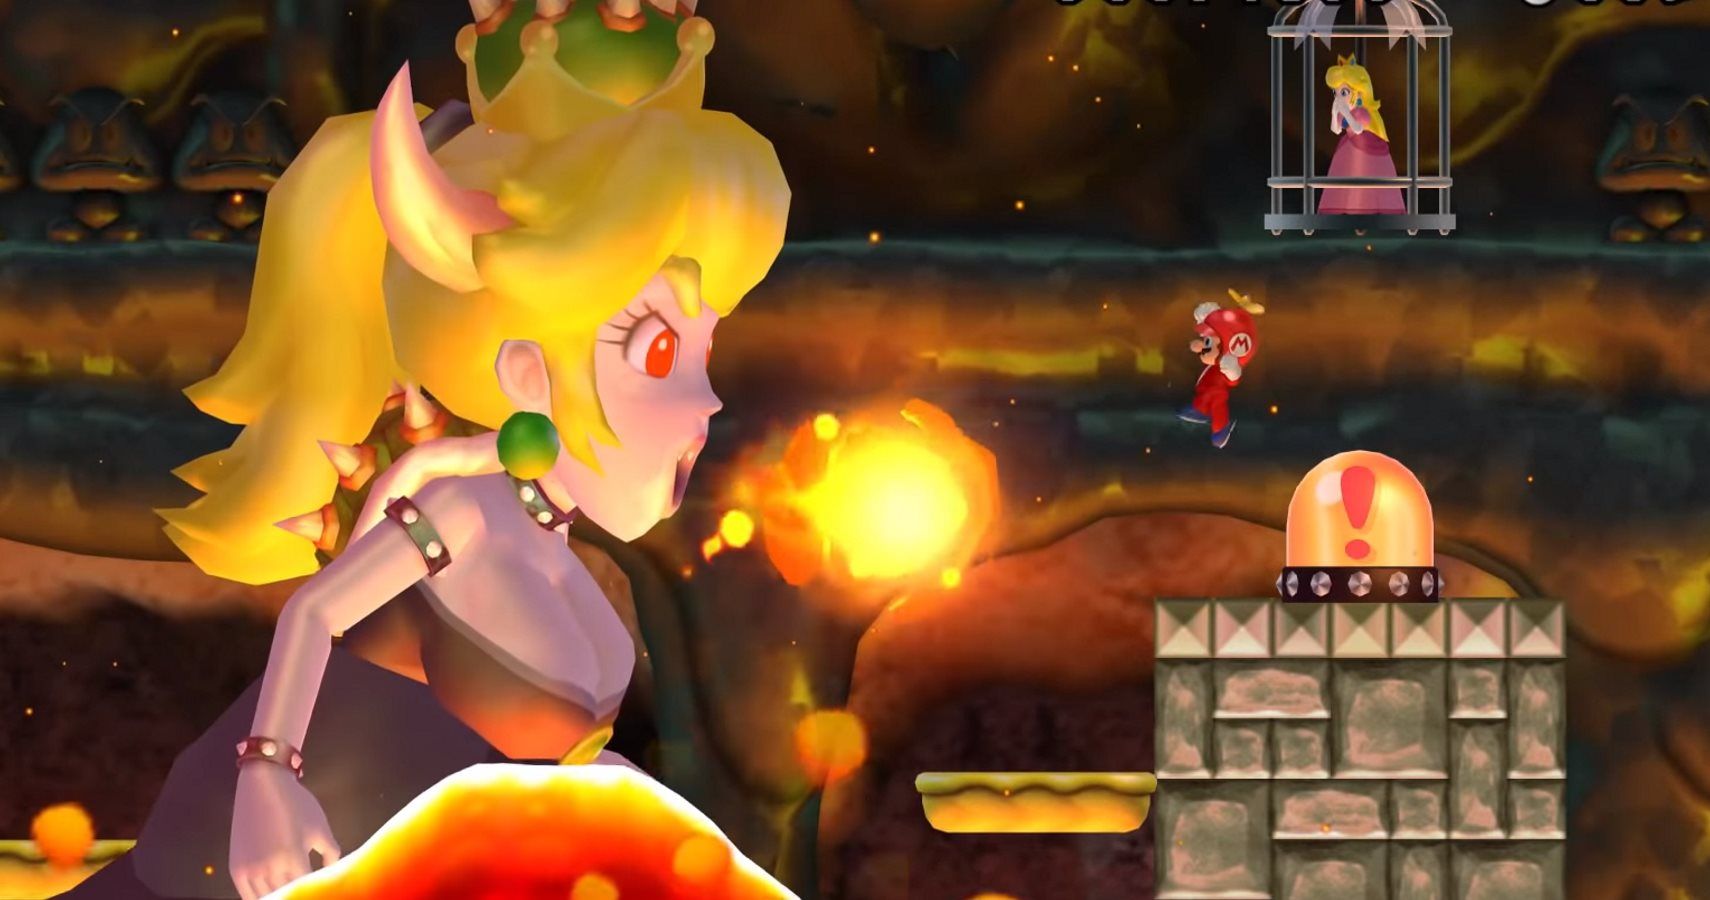 Yes, More Bowsette News: Modder Adds Her As A Boss In New Super Mario Bros